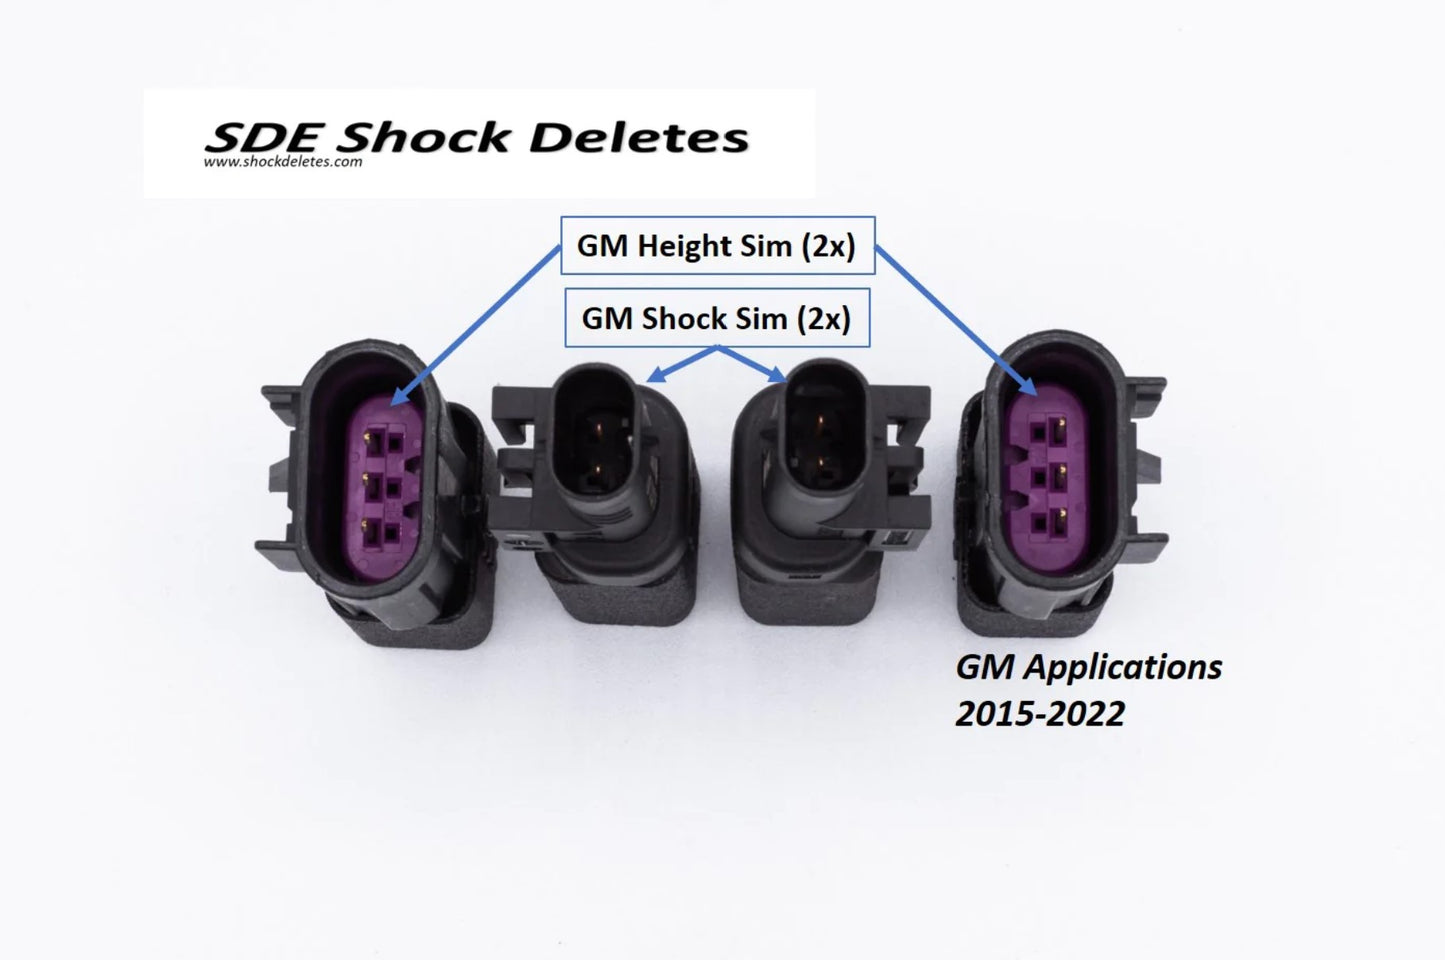 GM MagneRide Shock + Height Sim, Late Model Truck, SUV and Cars- SDE